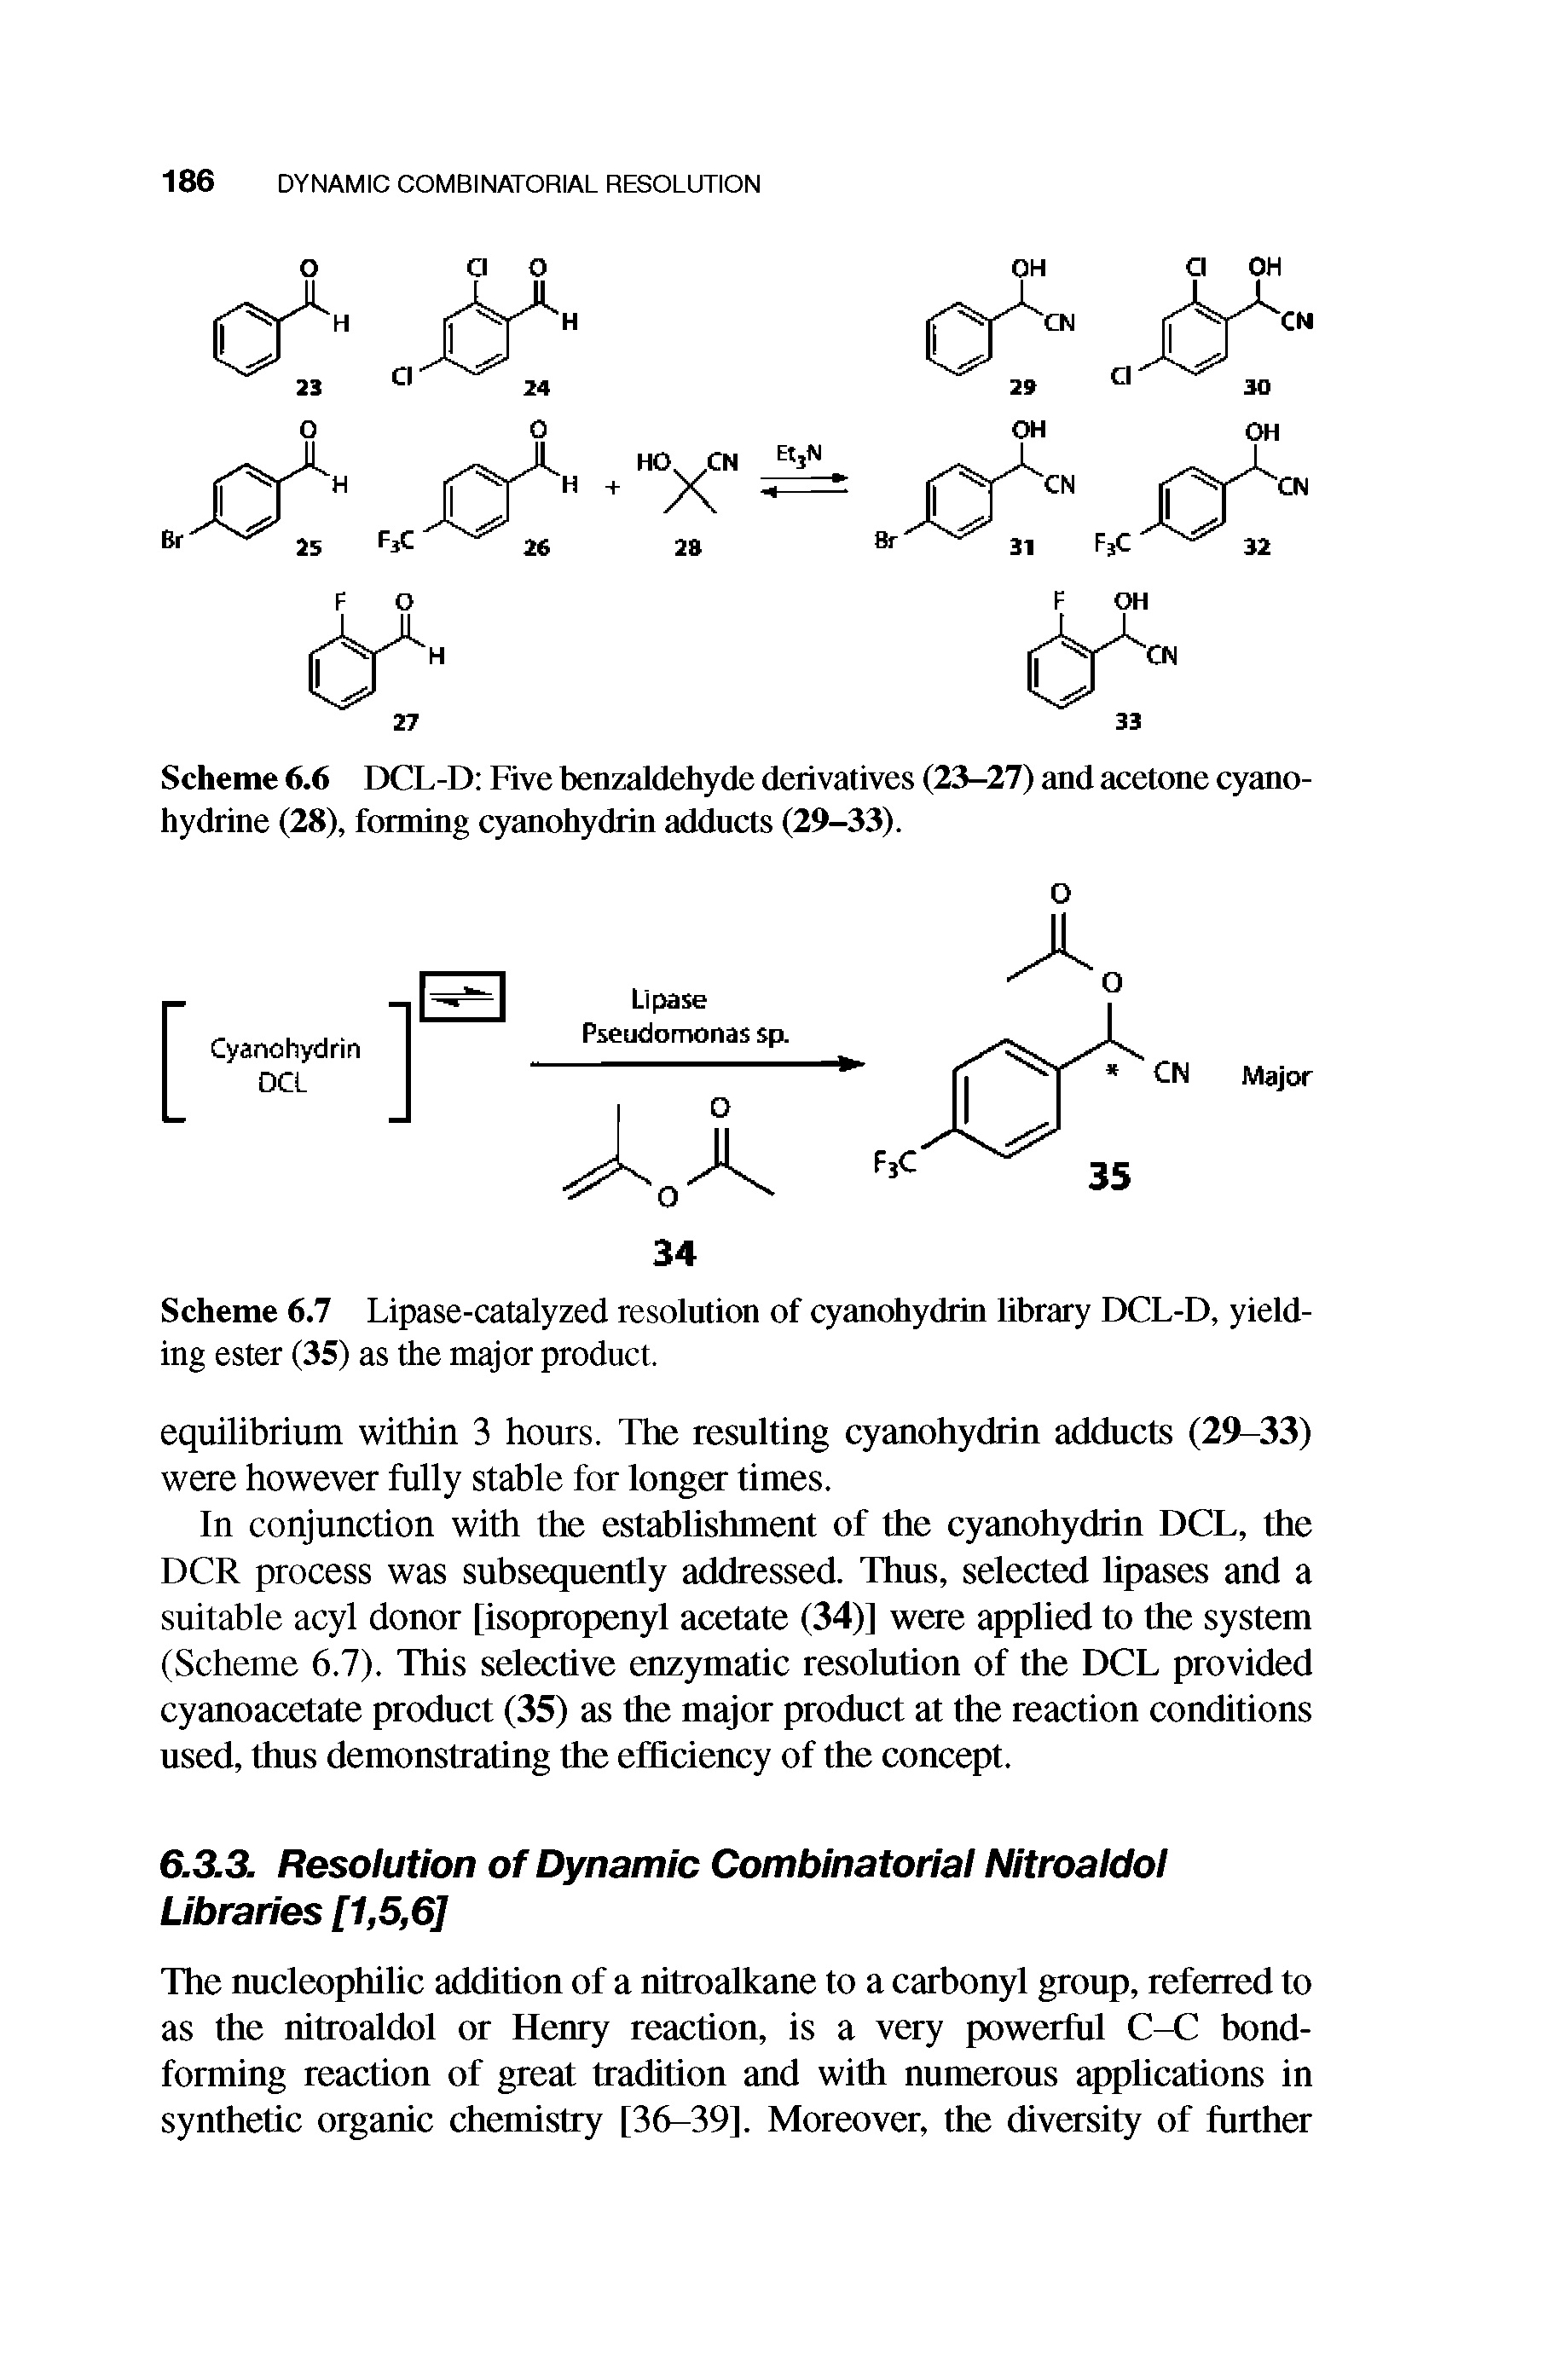 Scheme 6.7 Lipase-catalyzed resolution of cyanohydrin library DCL-D, yielding ester (35) as the major product.